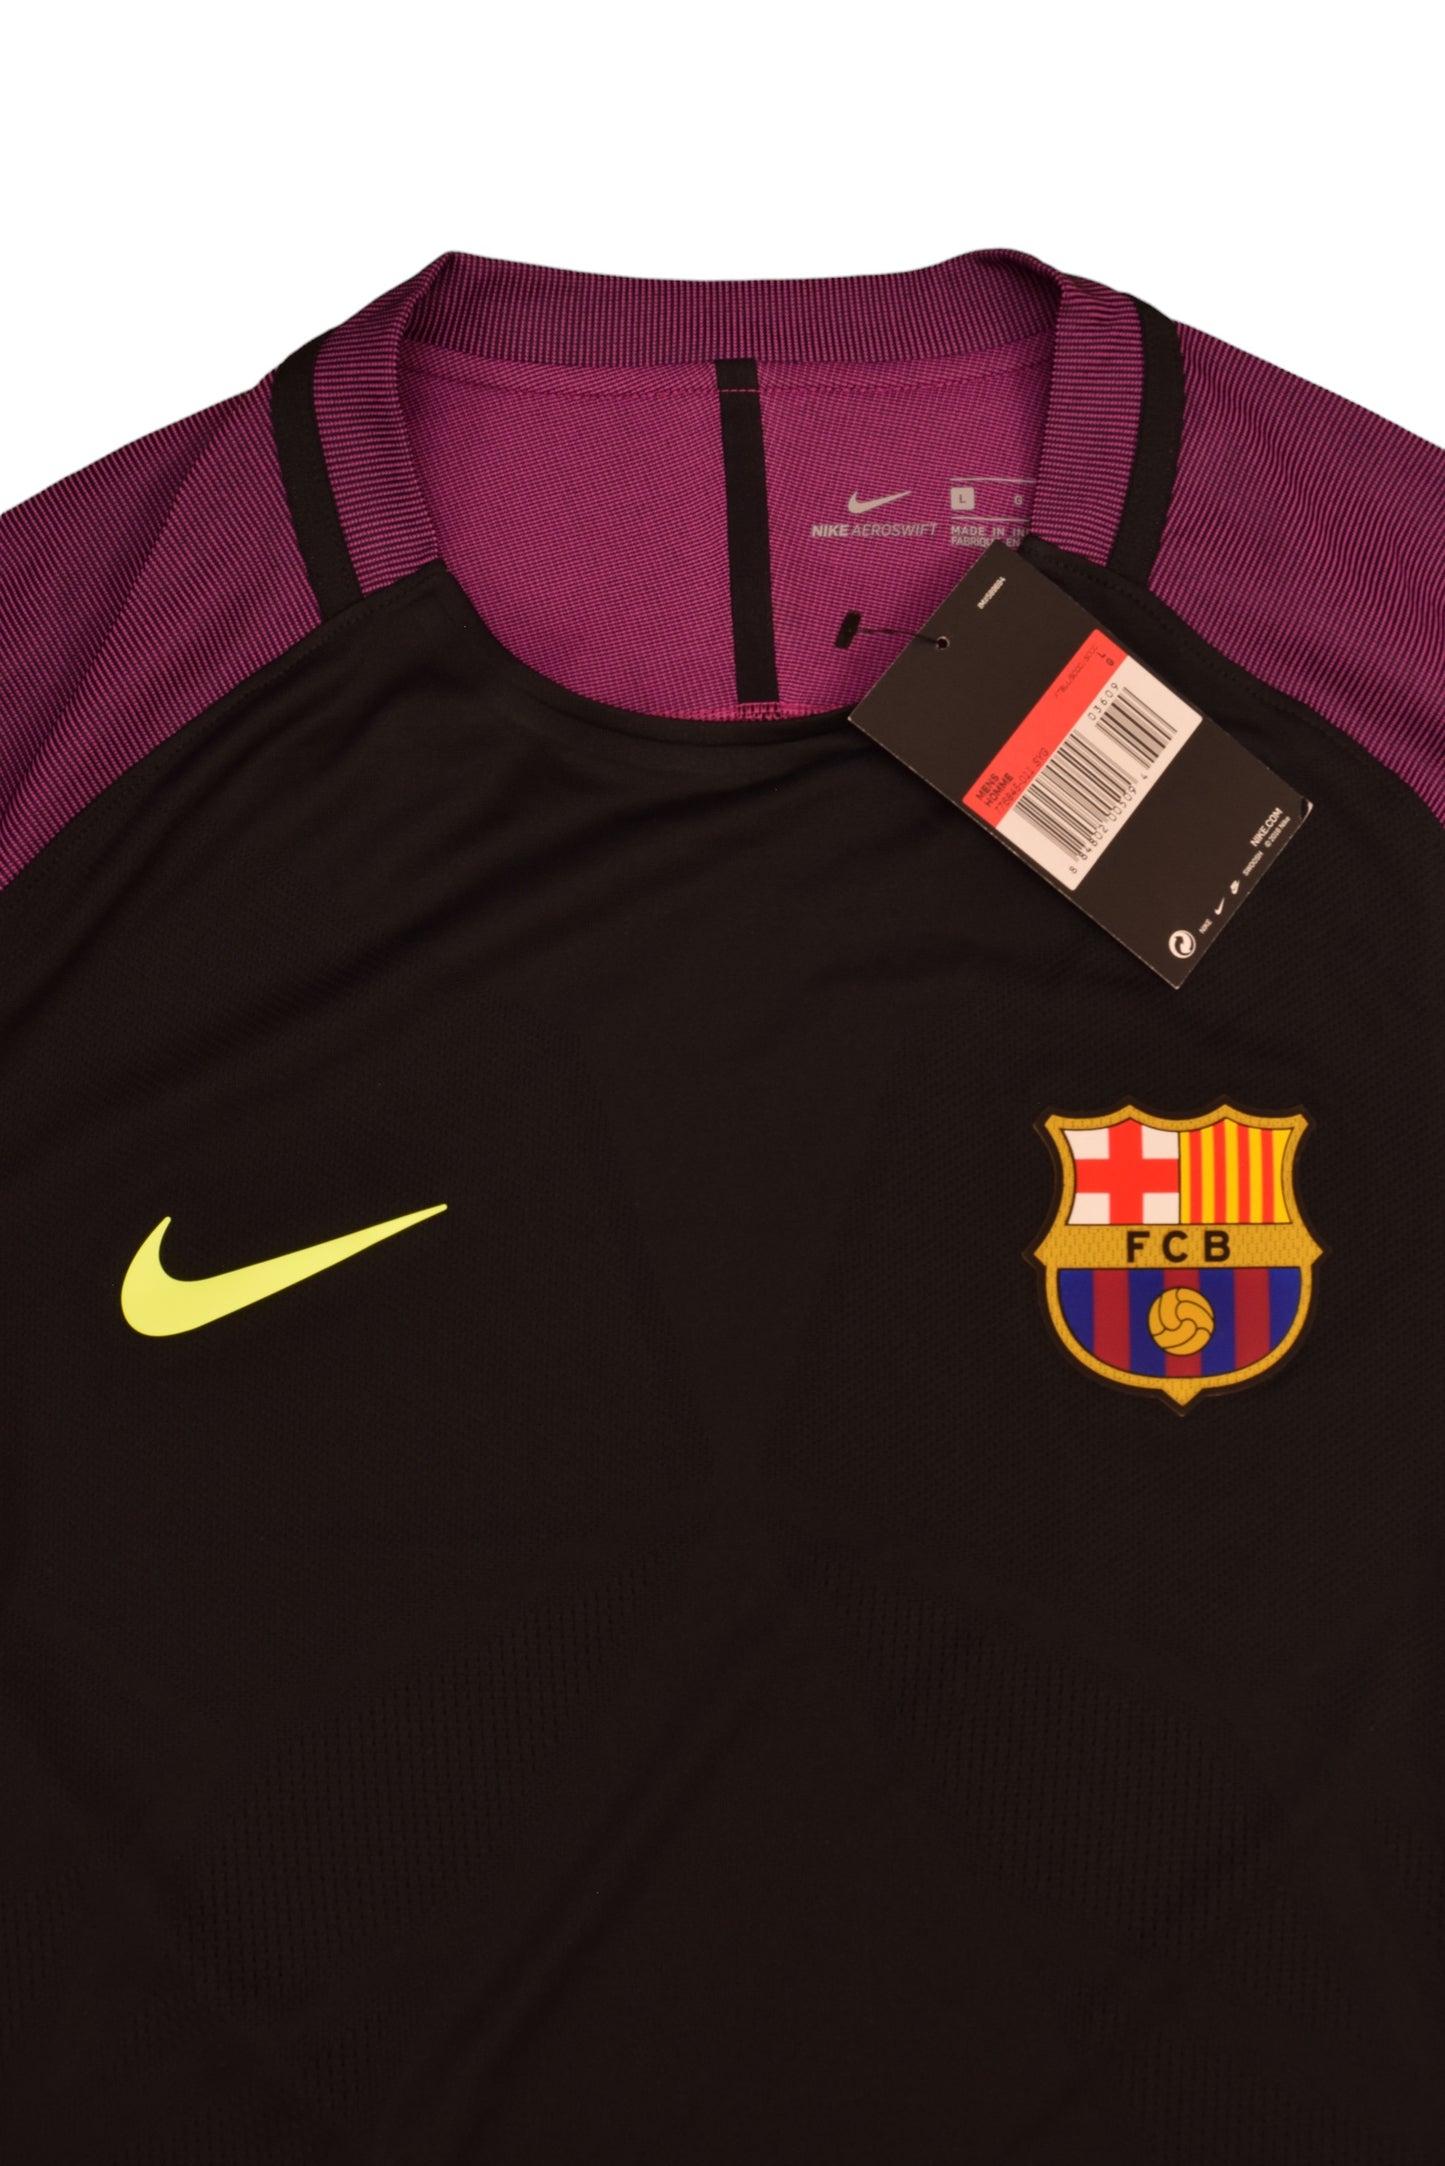 Authentic New Barcelona Nike Aeroswift Player's Issue / Edition Goalkeeper Home Football BNWT Deadstock Shirt Size L Black Purple Beko Unicef